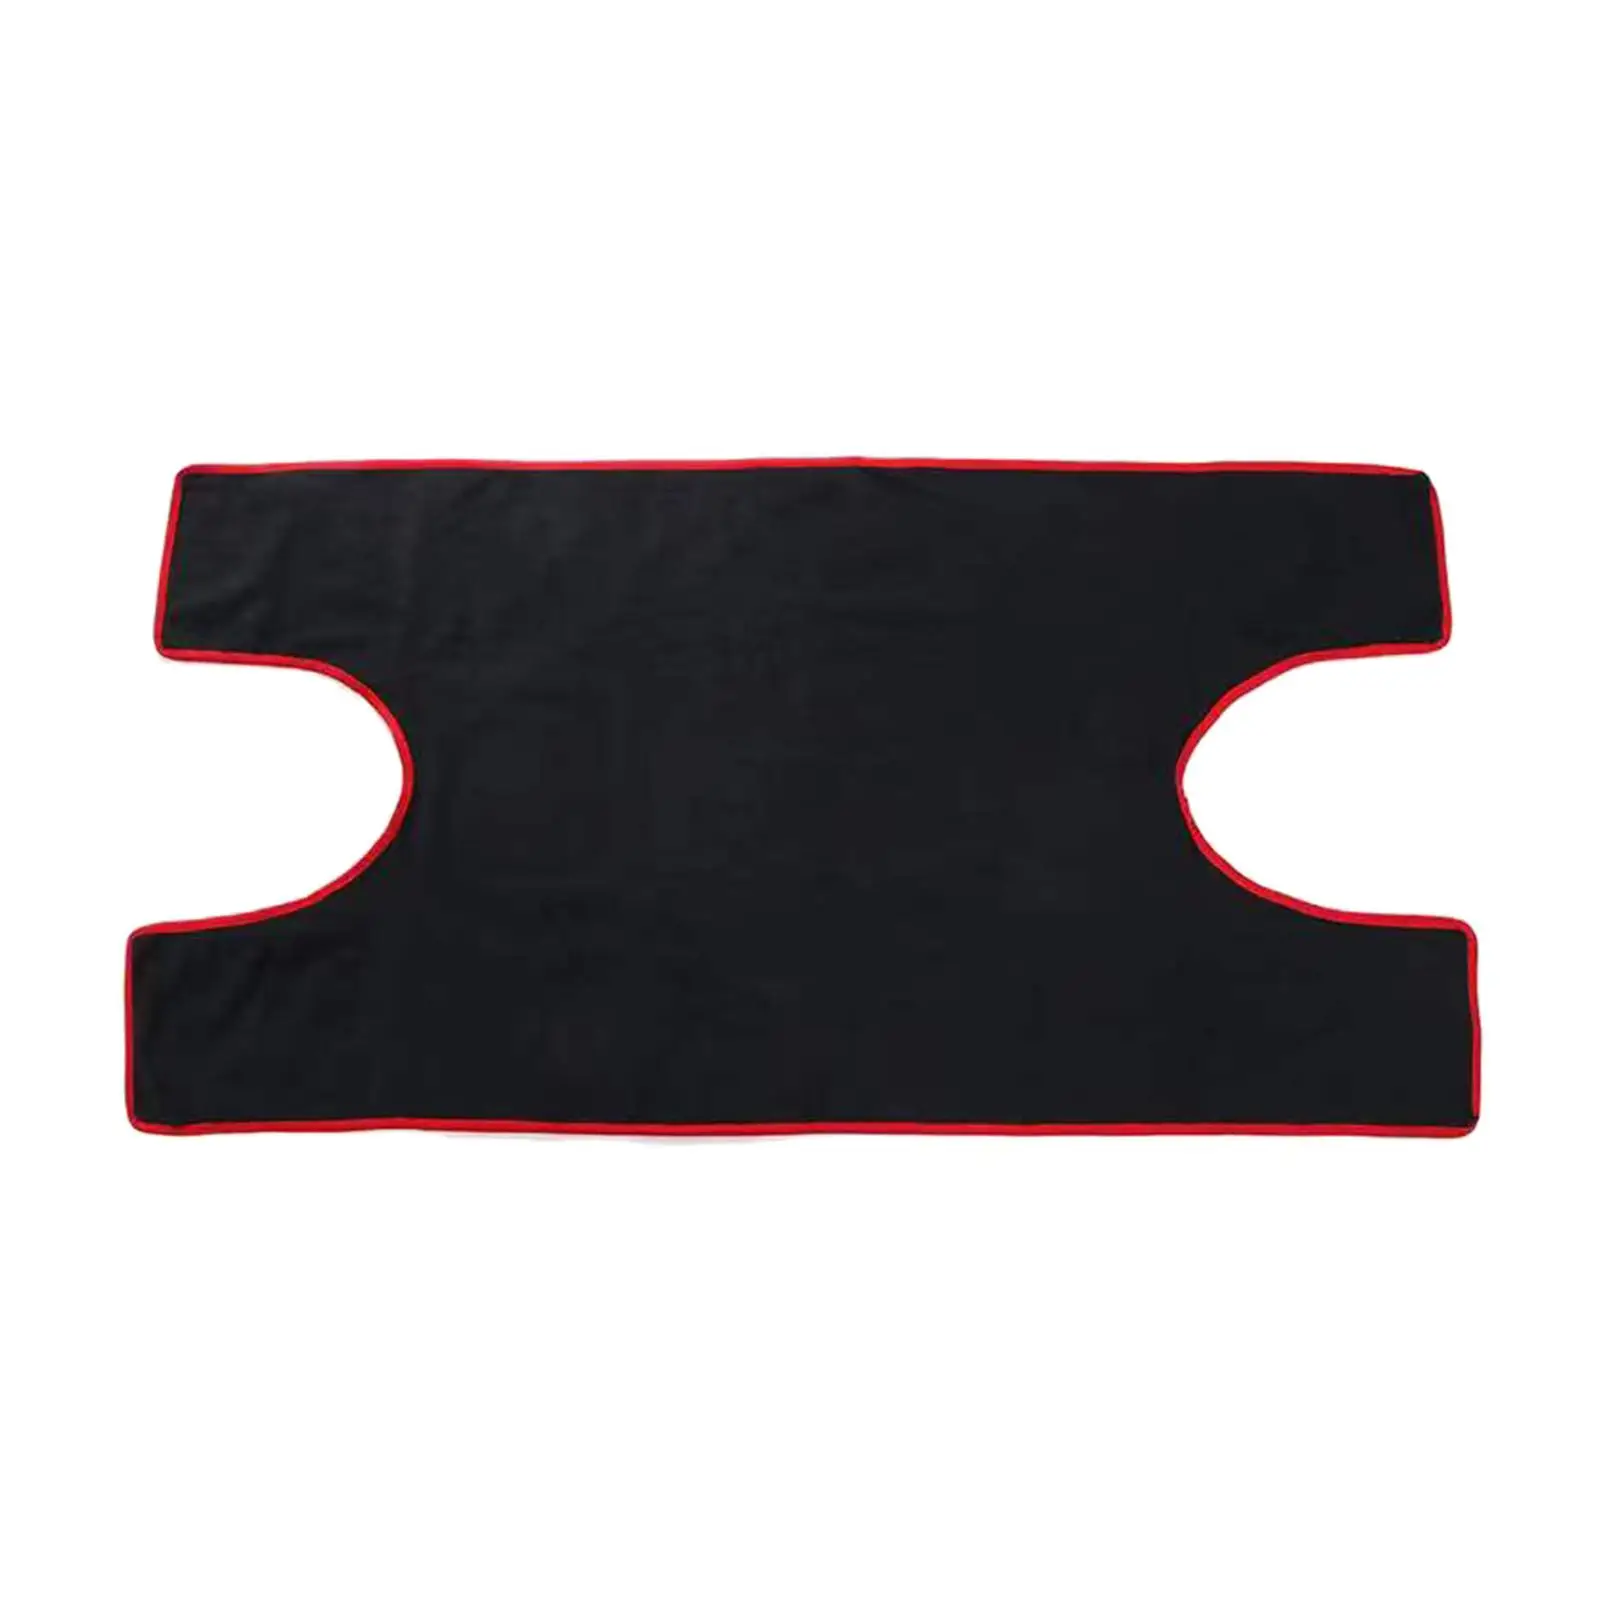 Exercise Bike Mat Soundproof Trainer Protective Flooring Stationary Bike Mat for Fitness Bike Gym Indoor Cycling Equipment